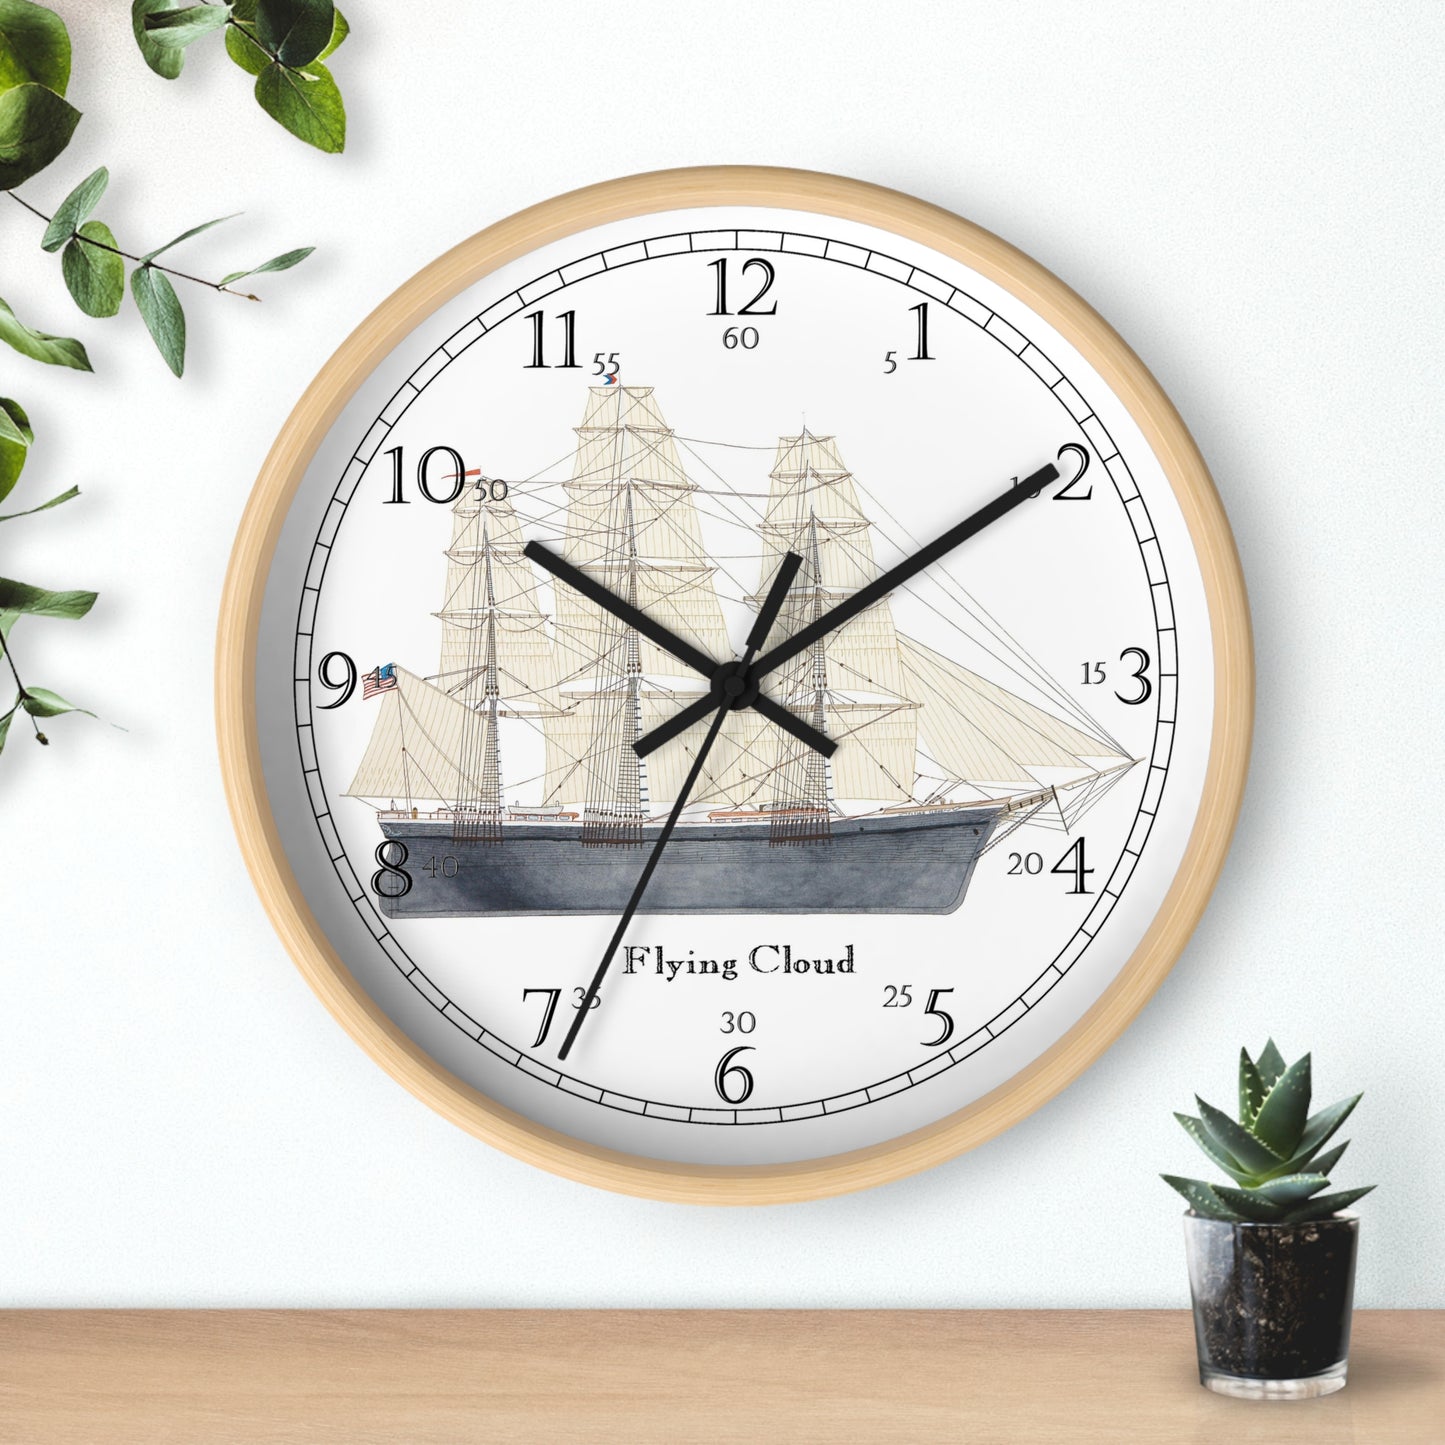 The clipper Flying Cloud English Numeral Clock will add a nautical touch to any room in your home.  It makes a great gift for anyone who loves sailing or naval history.